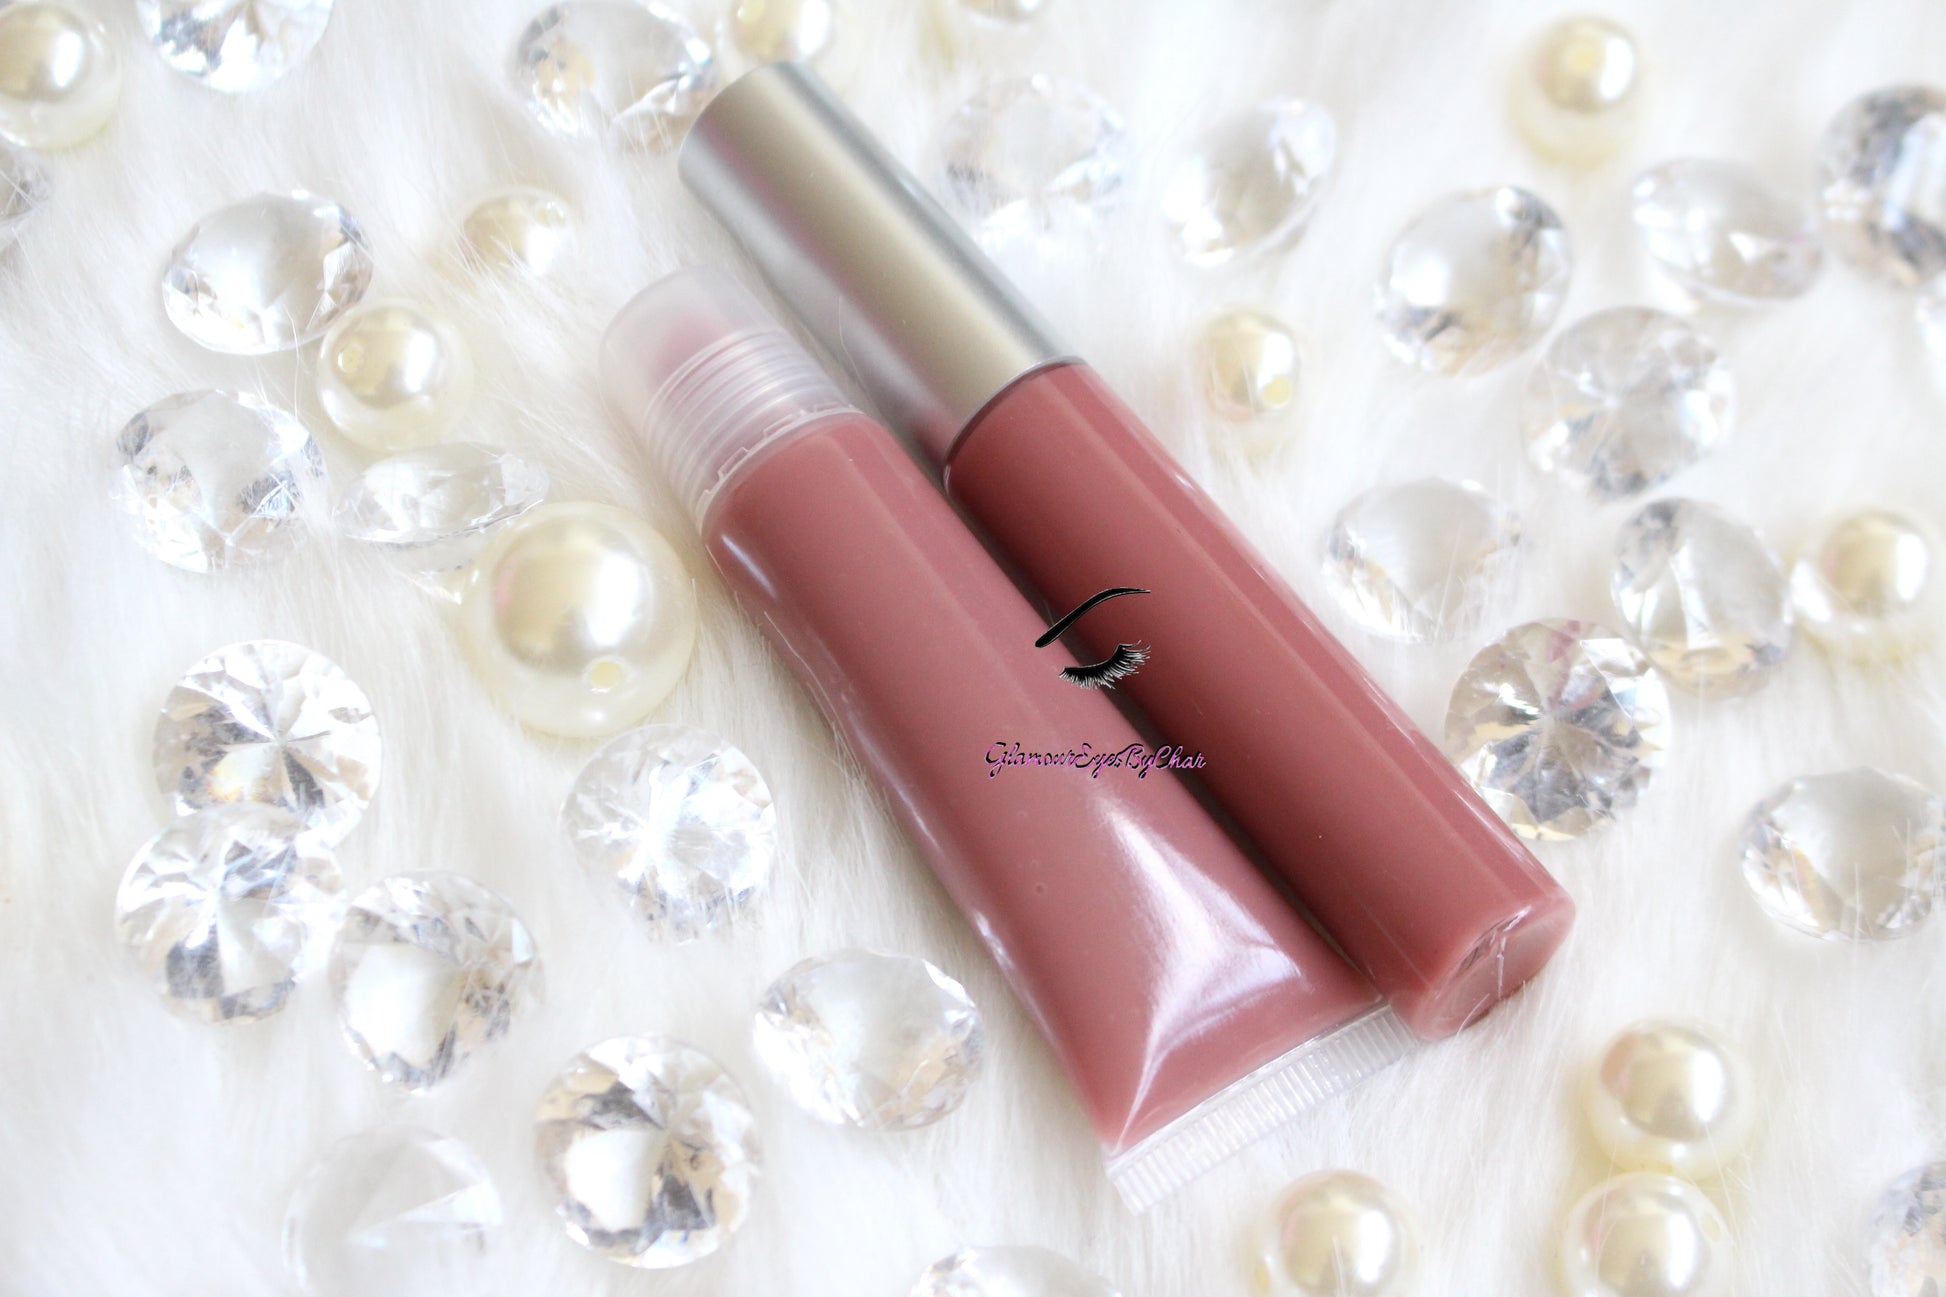 Lala is a gorgeous nude pink hydrating gloss. This gloss is also vegan, gluten-free, high shine, smooth and long lasting. It's made with premium rich ingredients to keep your lips soft, moisturized and luscious without feeling sticky. Lala is available in a squeeze tube and a wand tube (doe foot applicator) for a more precise application.